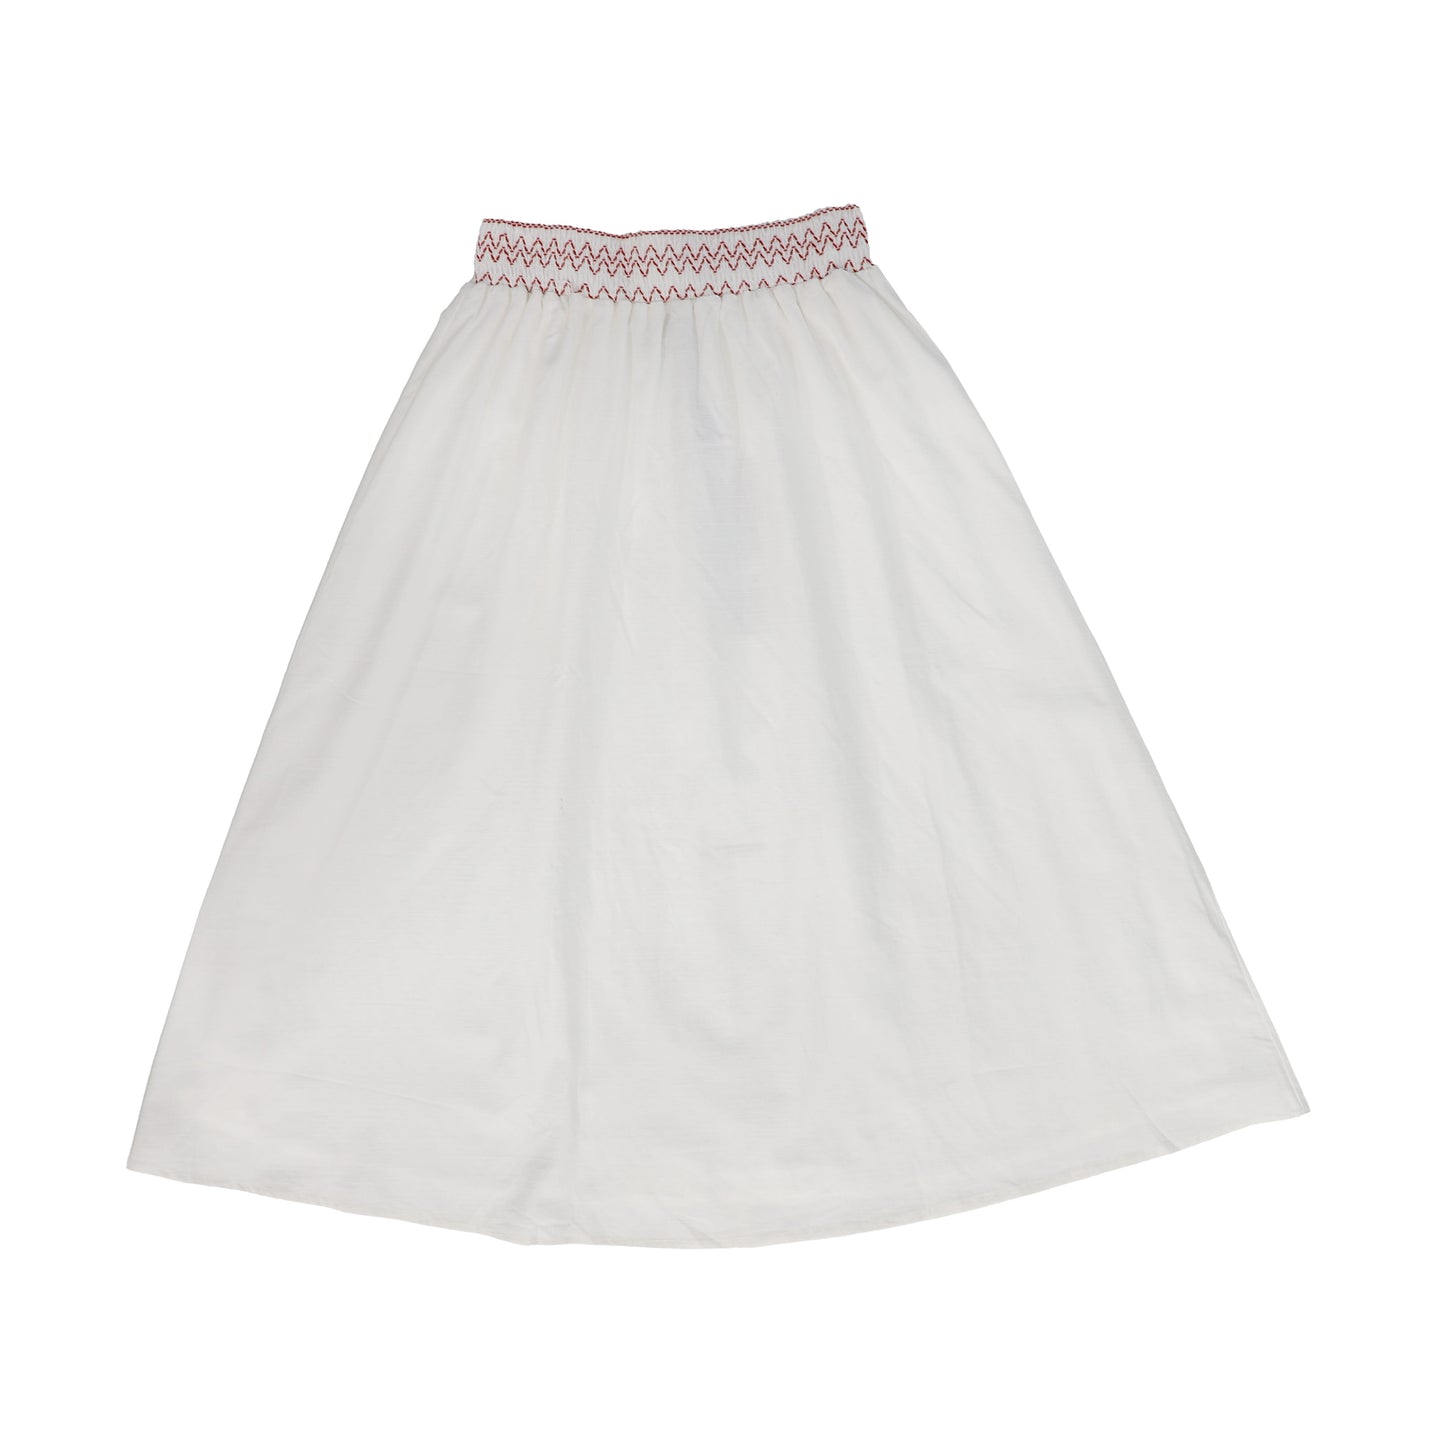 BACE COLLECTION WHITE SMOCKED STICHED DETAIL SKIRT [FINAL SALE]